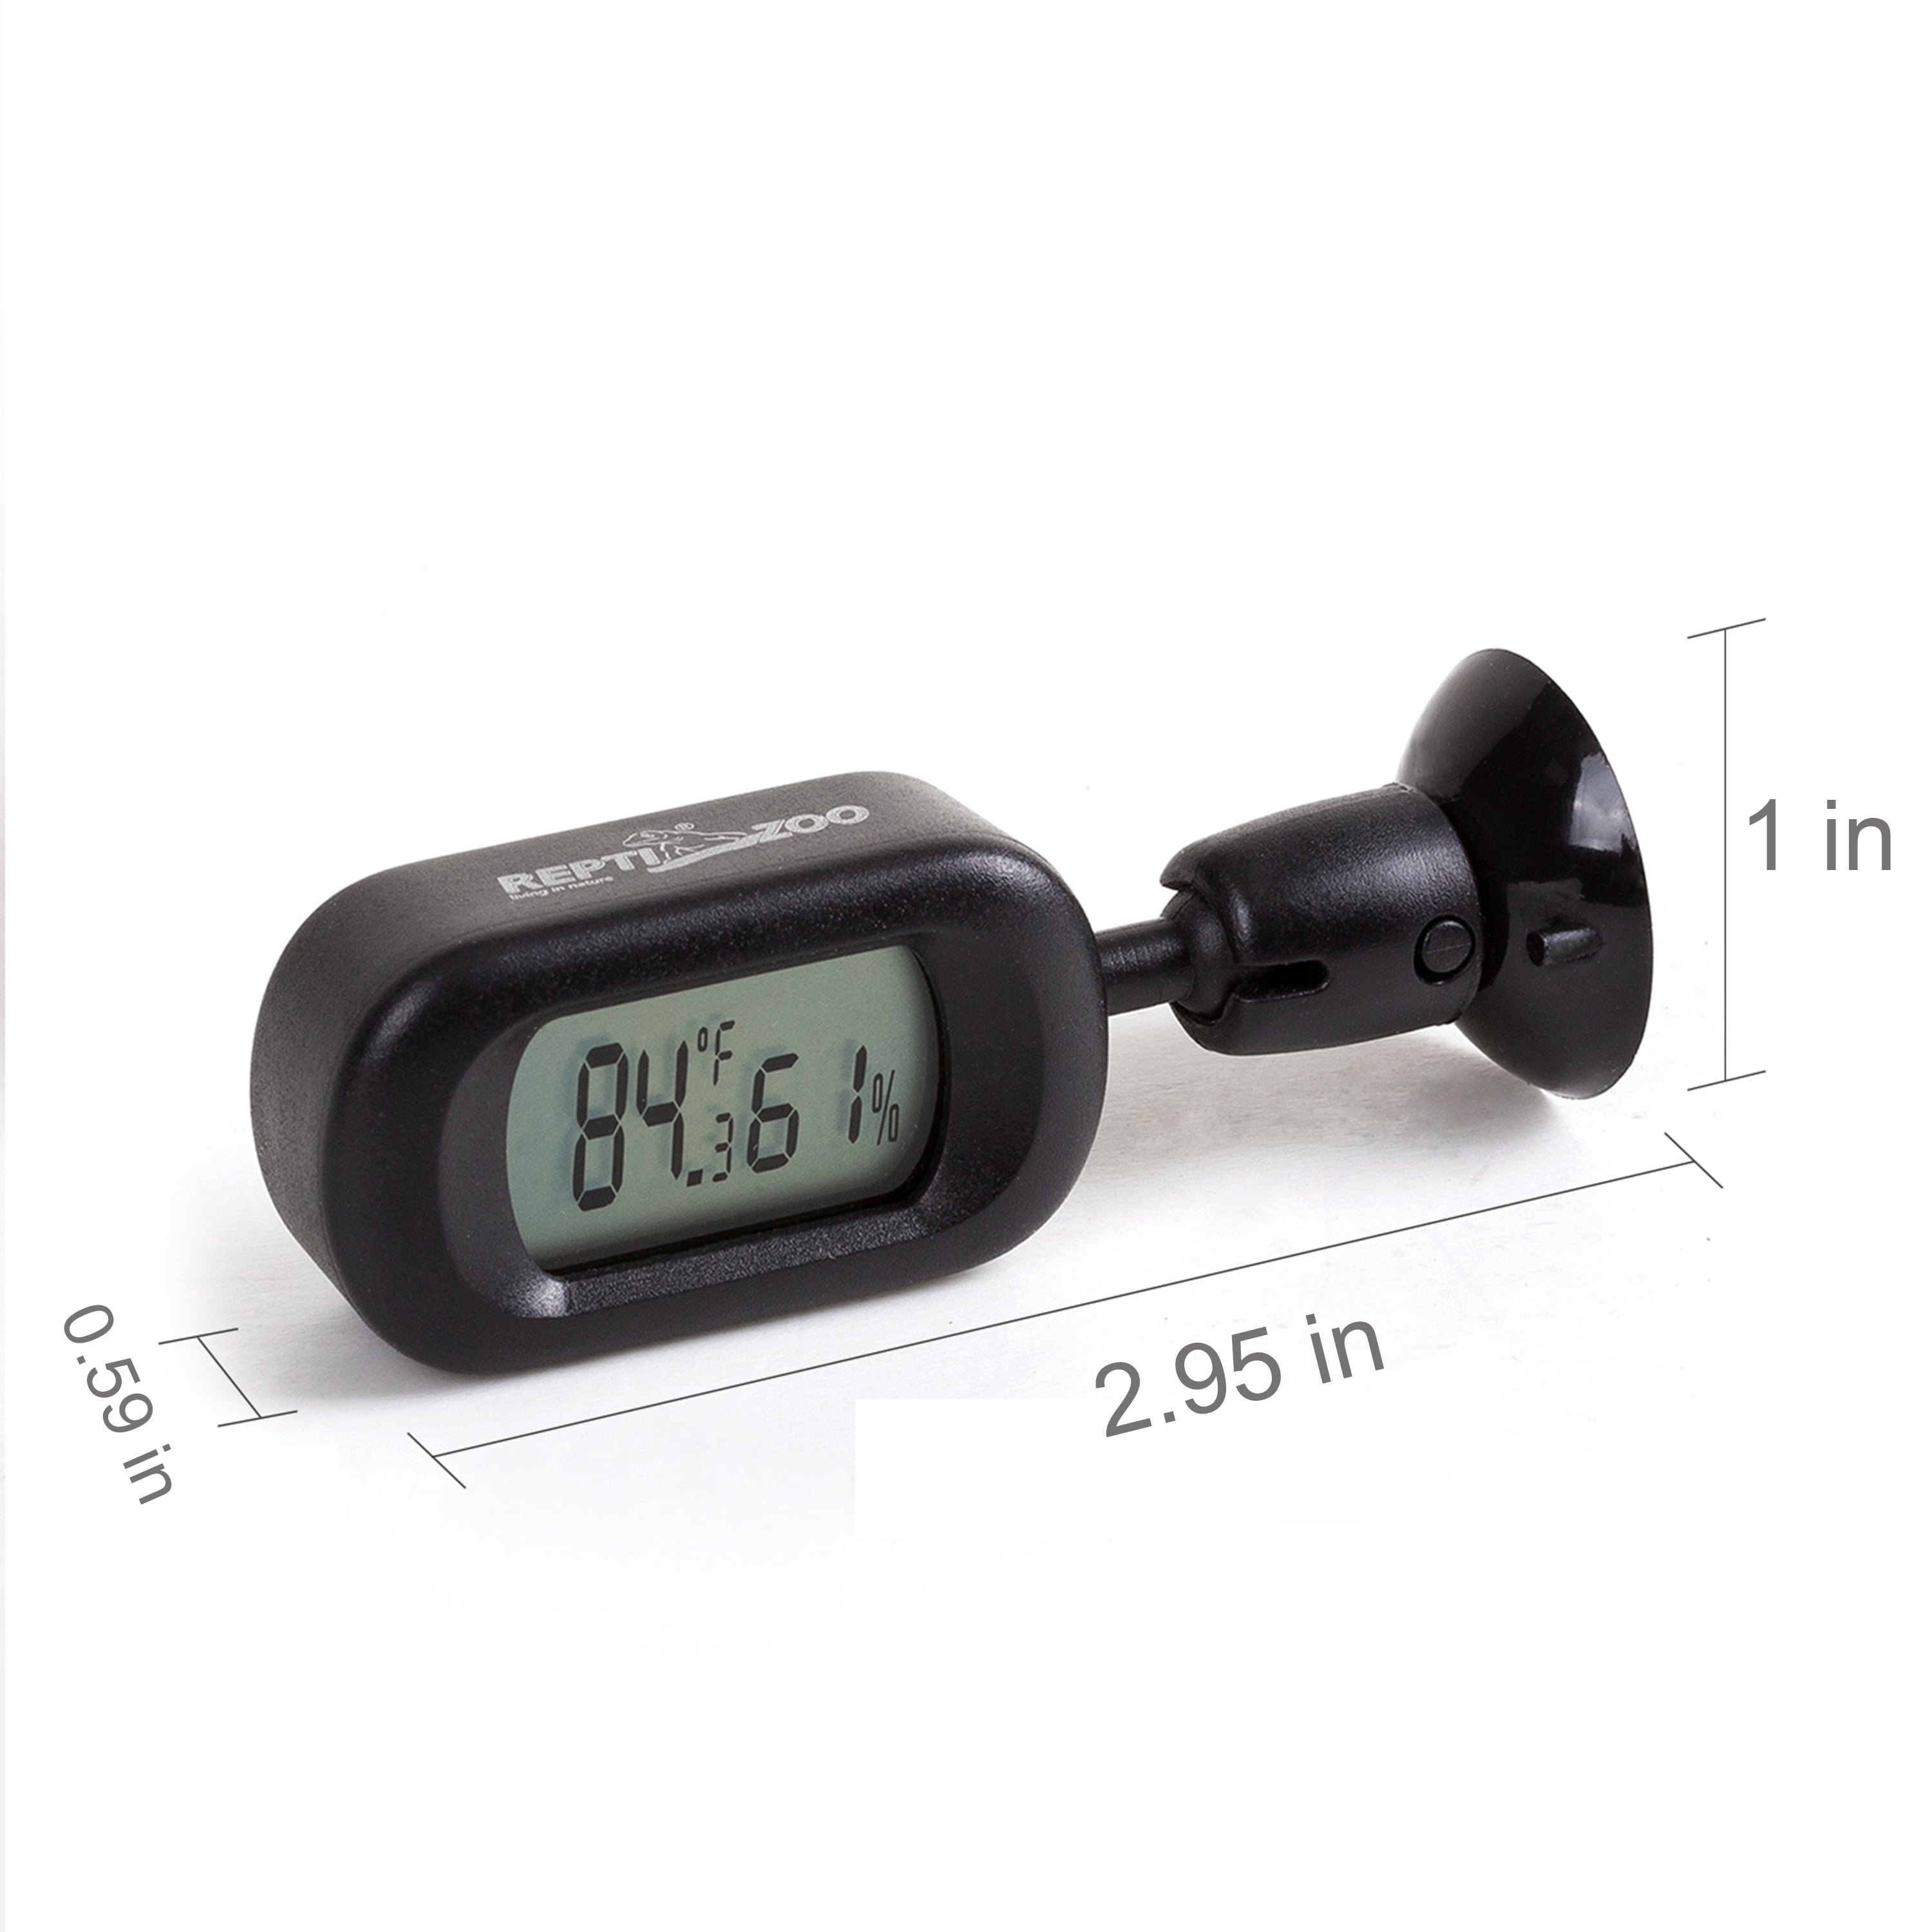 OiiBO Digital Thermo-Hygrometer with Suction Cup, Reptile Terrarium Humidity and Temperature Gauge Fahrenheit (?),Pack-2, Black